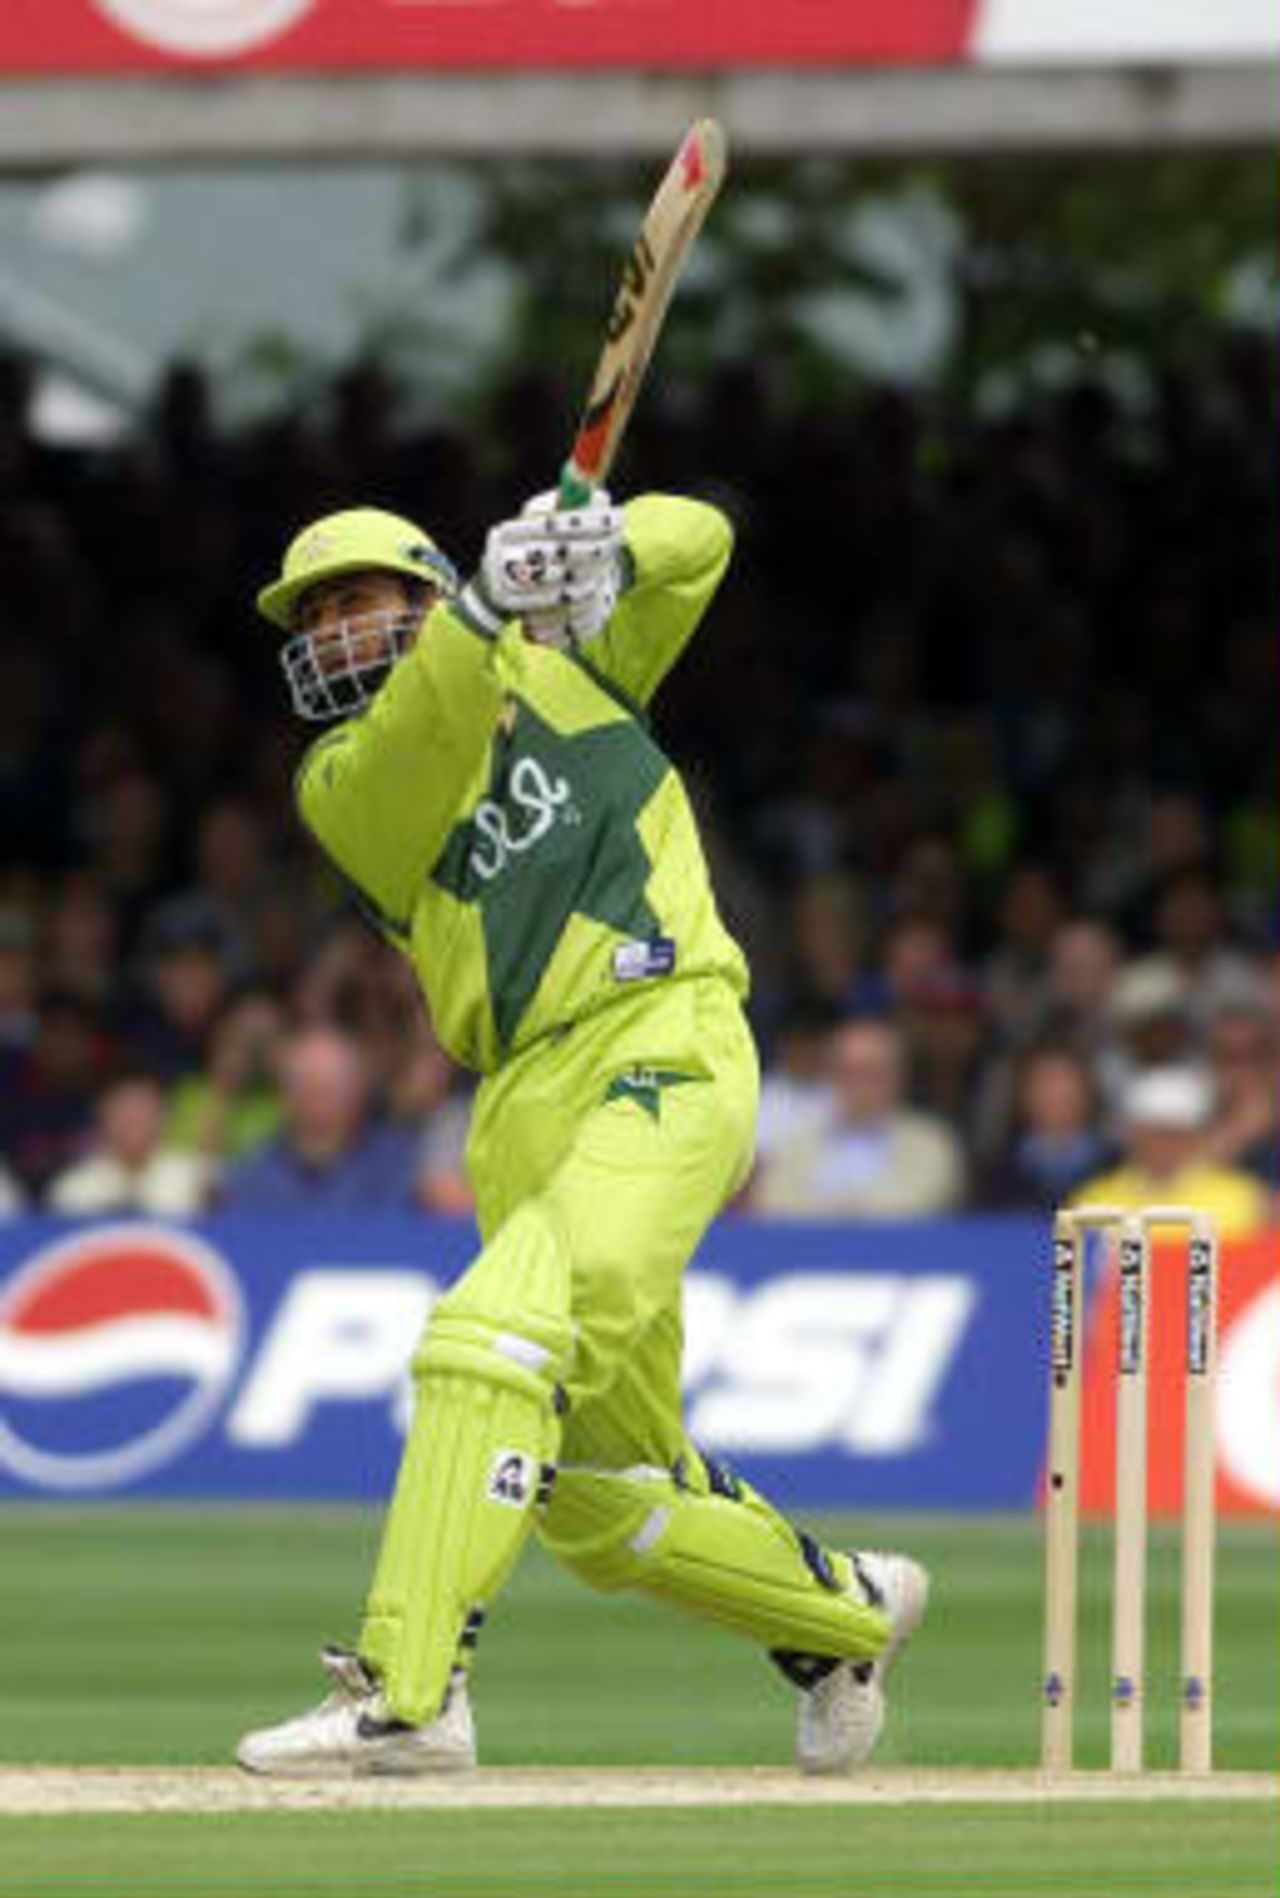 Pakistan's Abdur Razzaq hits out off the bowling of Australia's Glenn McGrath 20 June 1999 during the Cricket World Cup final at Lord's, London